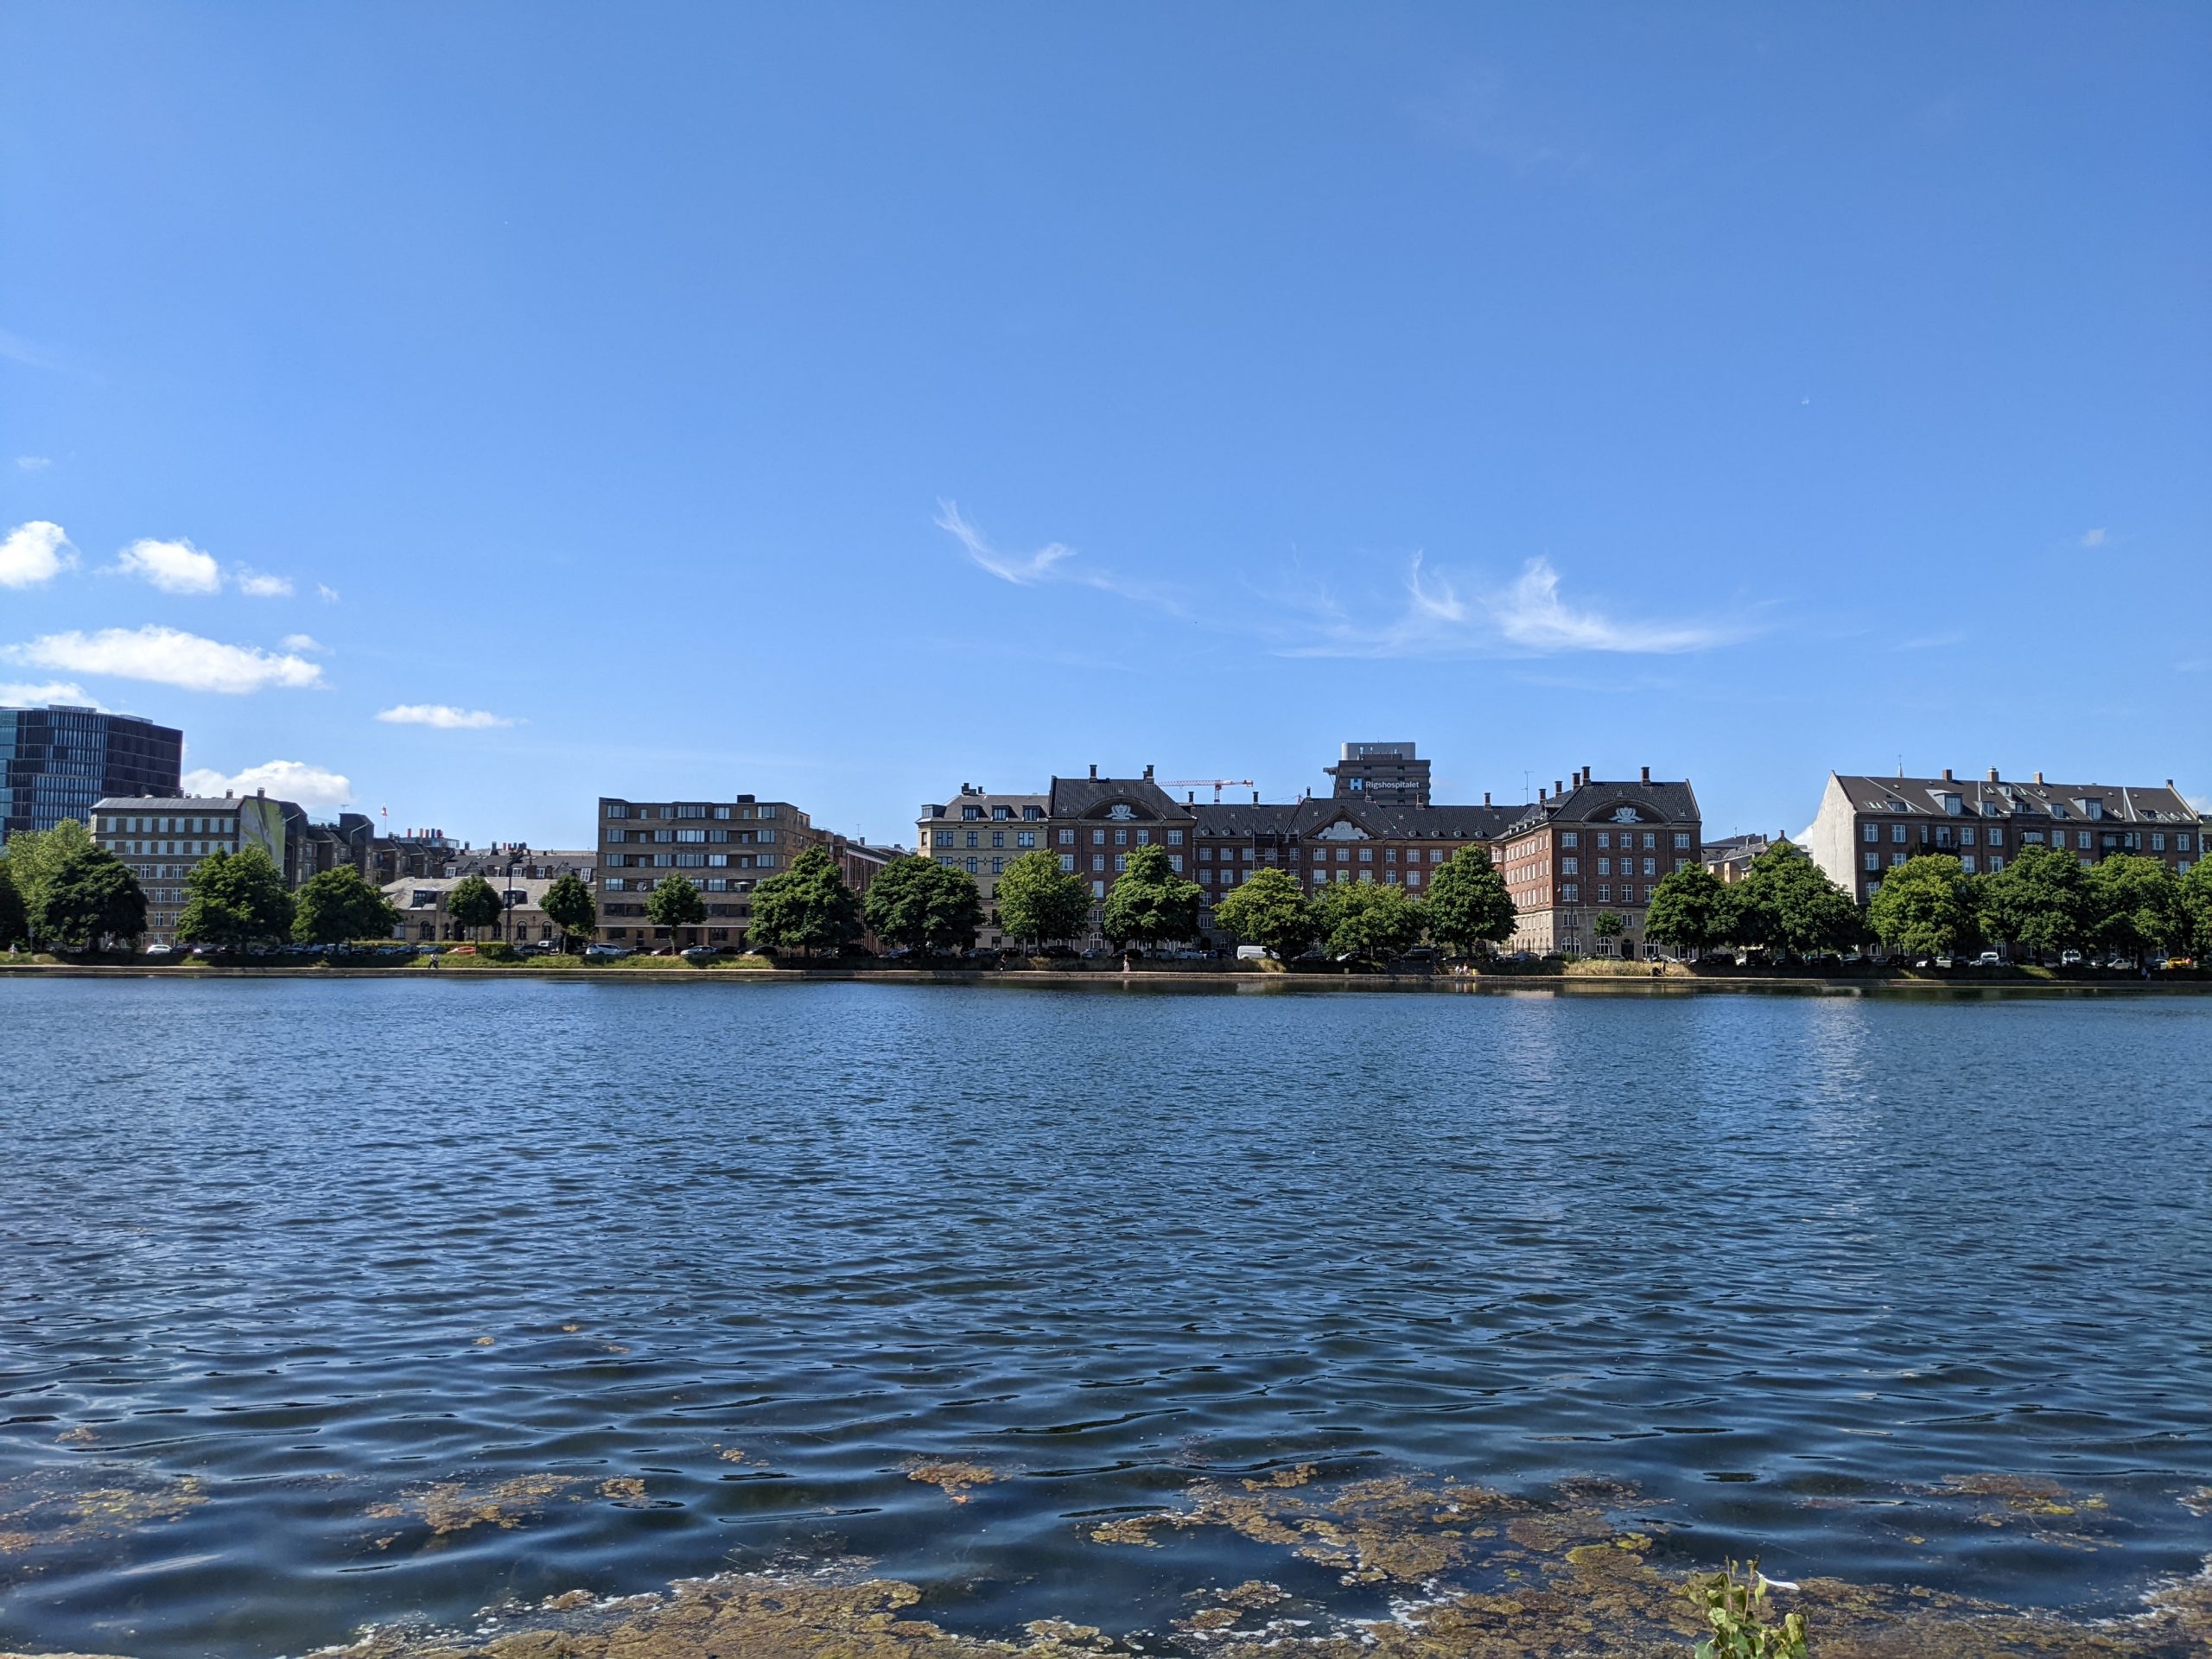 A lake under a blue sky with buildings on the other side